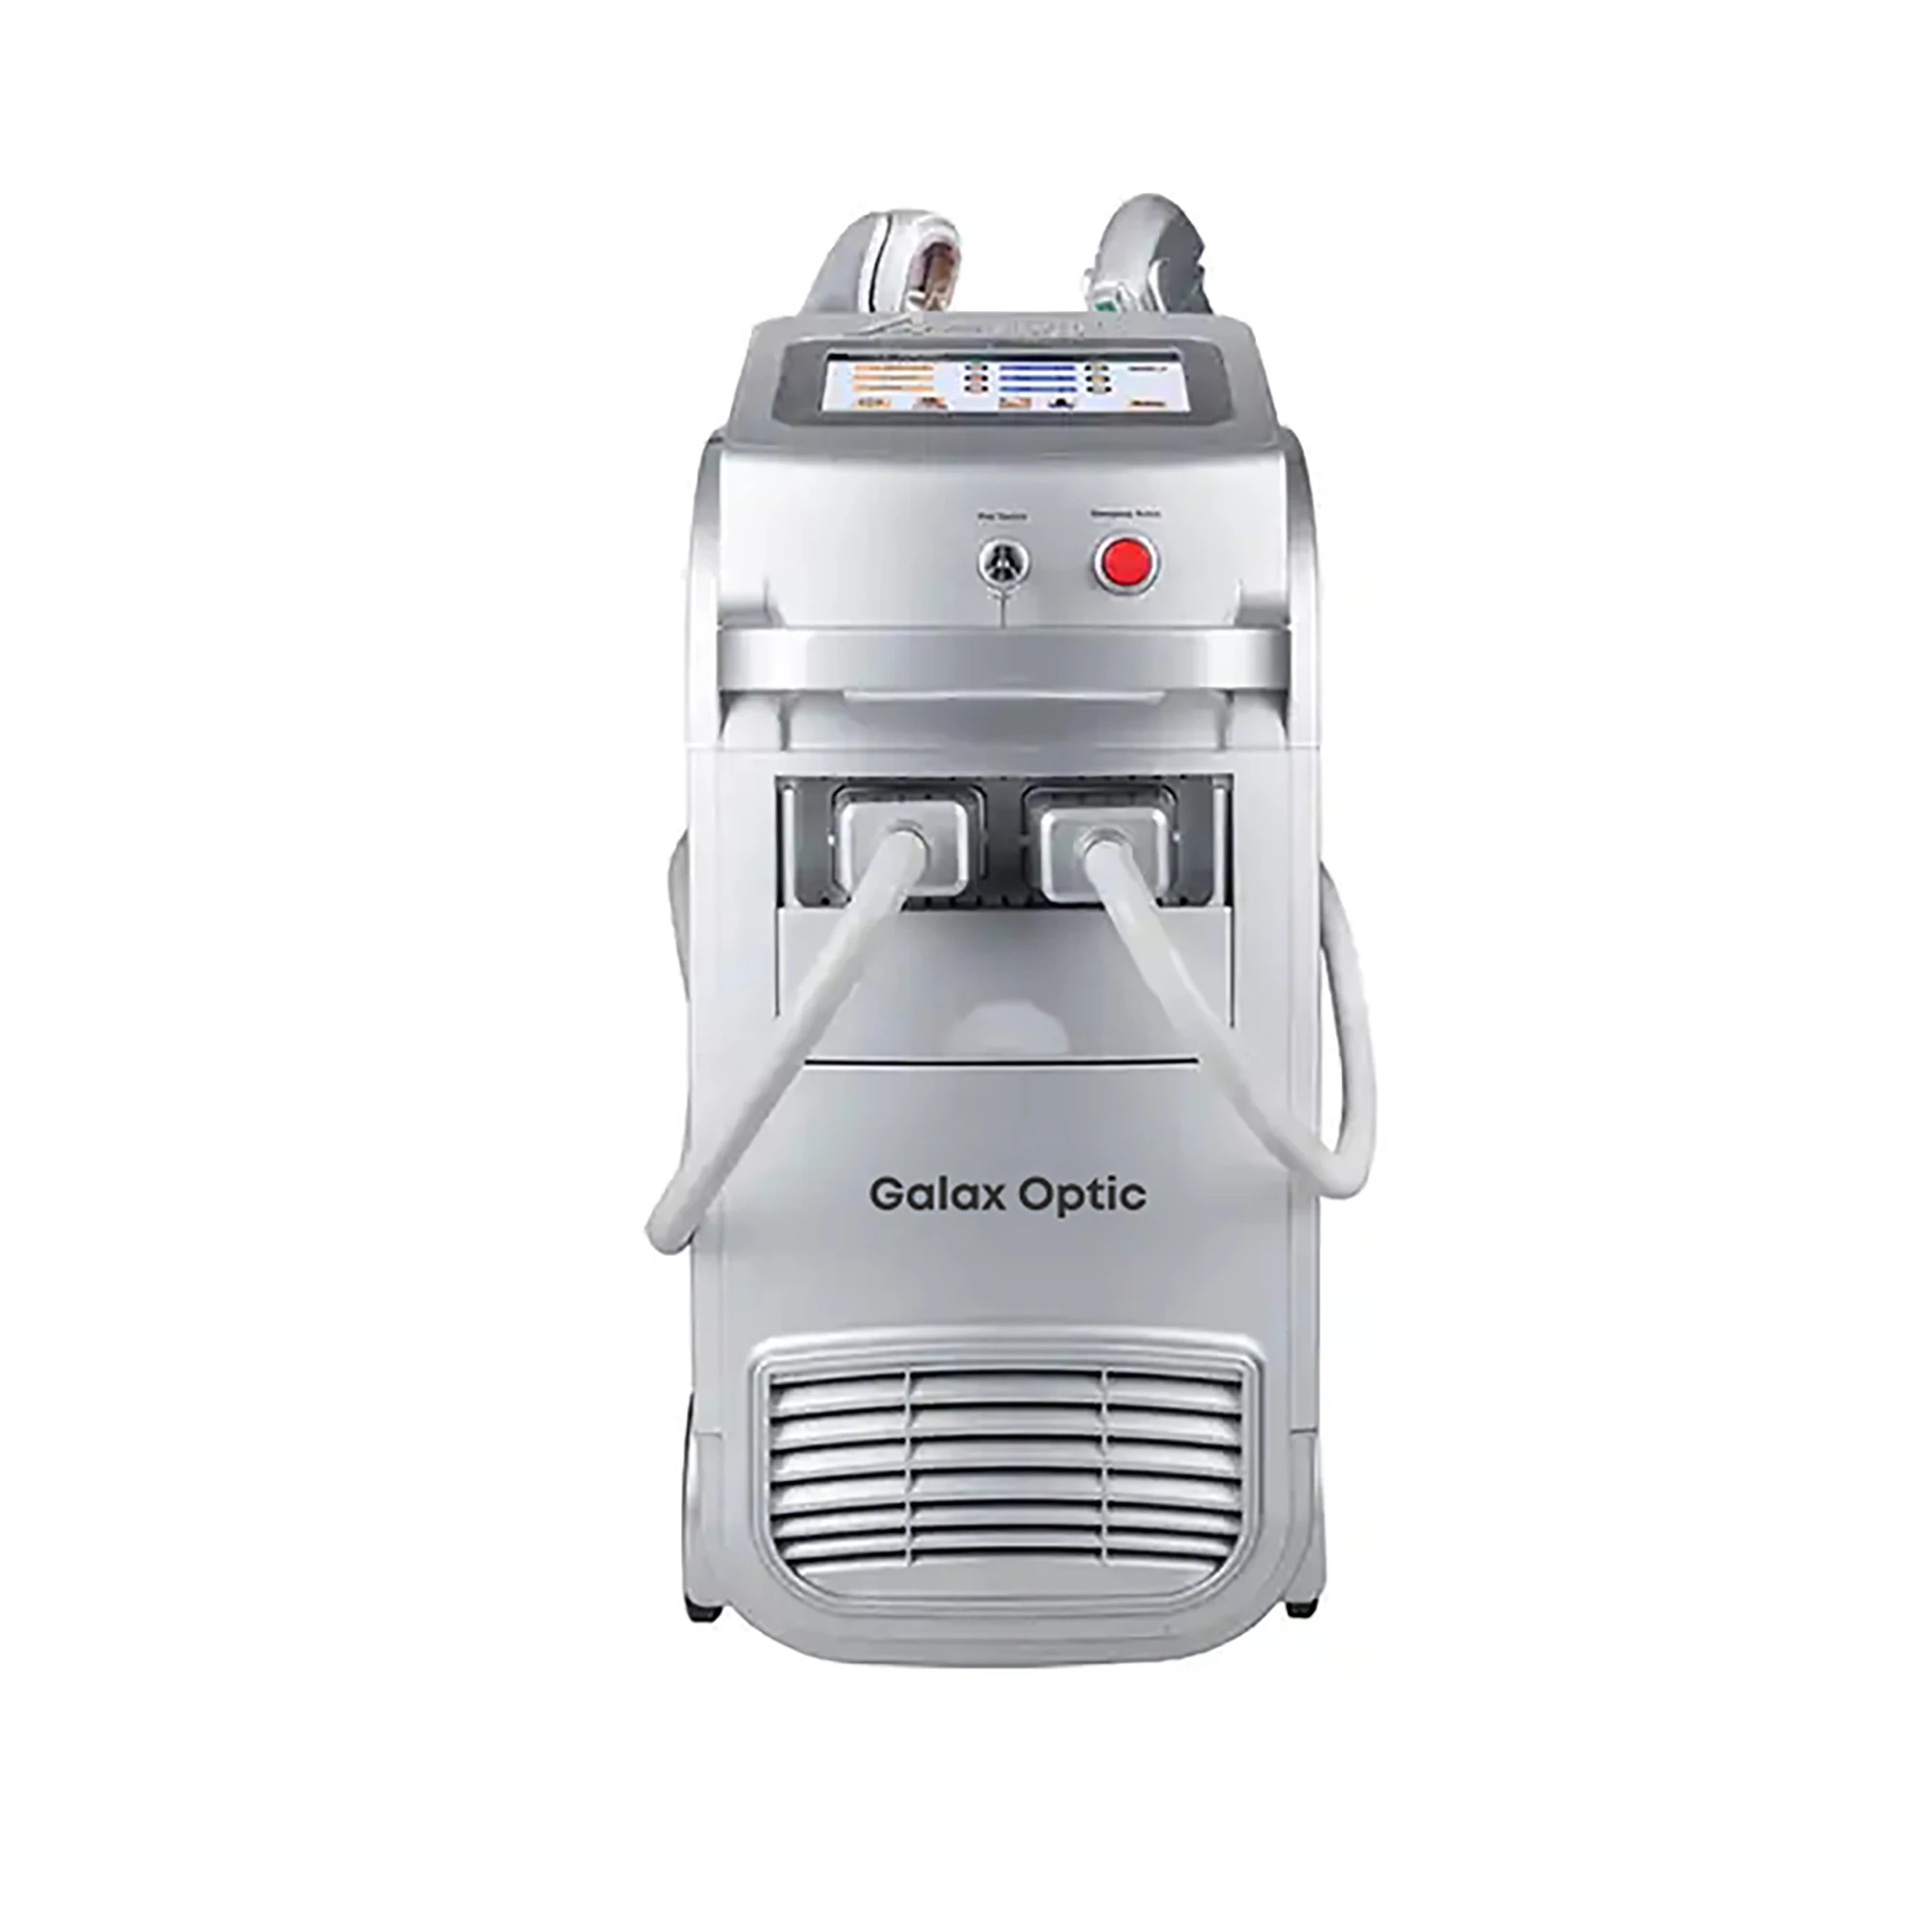 808nm Diode Laser Machine for Hair Removal